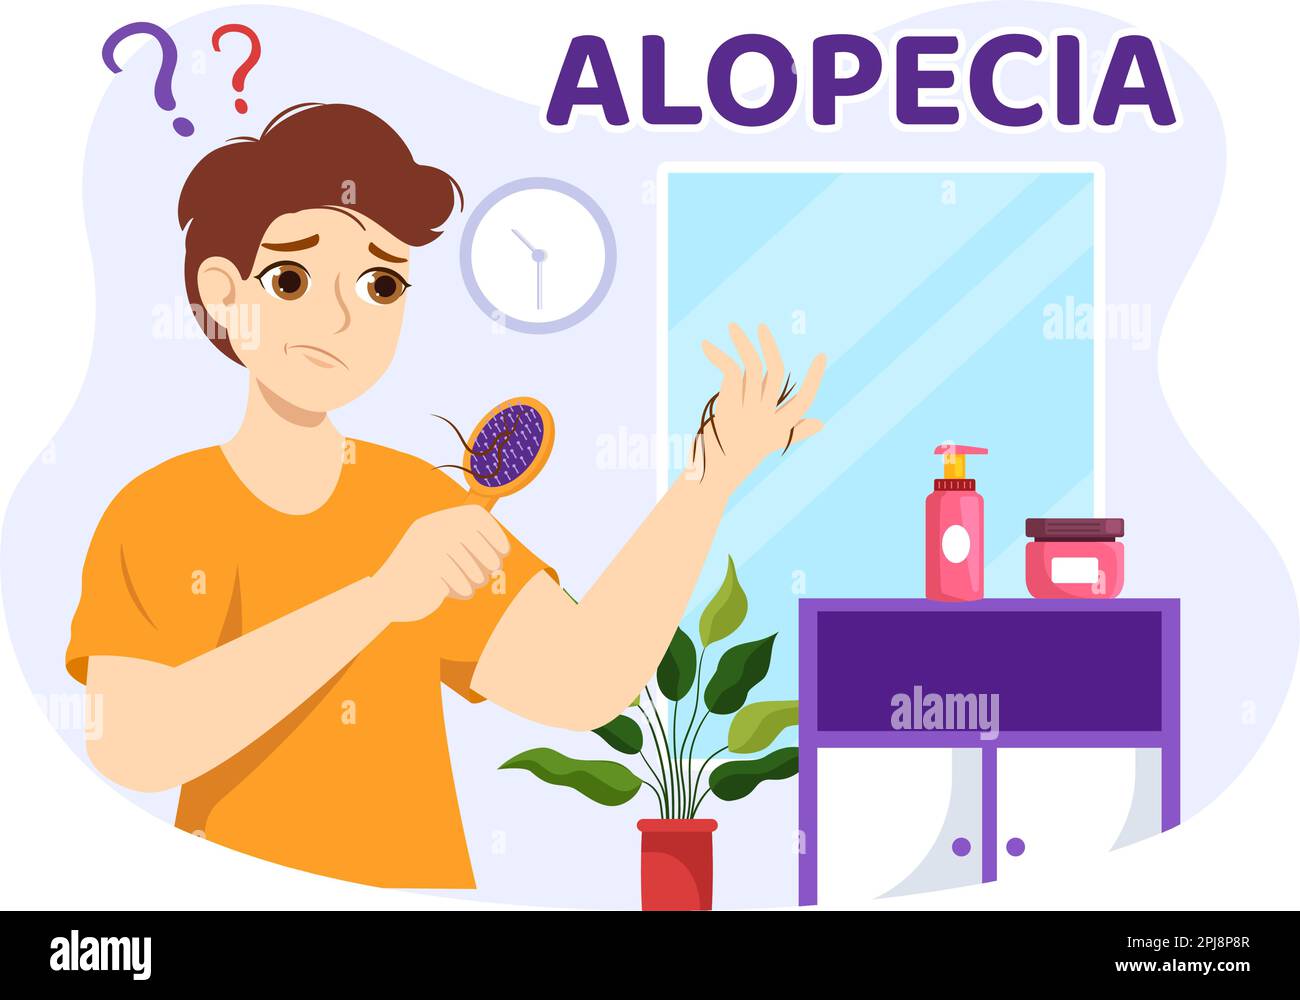 Alopecia Illustration with Hair Loss Autoimmune Medical Disease and Baldness in Healthcare Flat Cartoon Hand Drawn Banner or Landing Page Templates Stock Vector